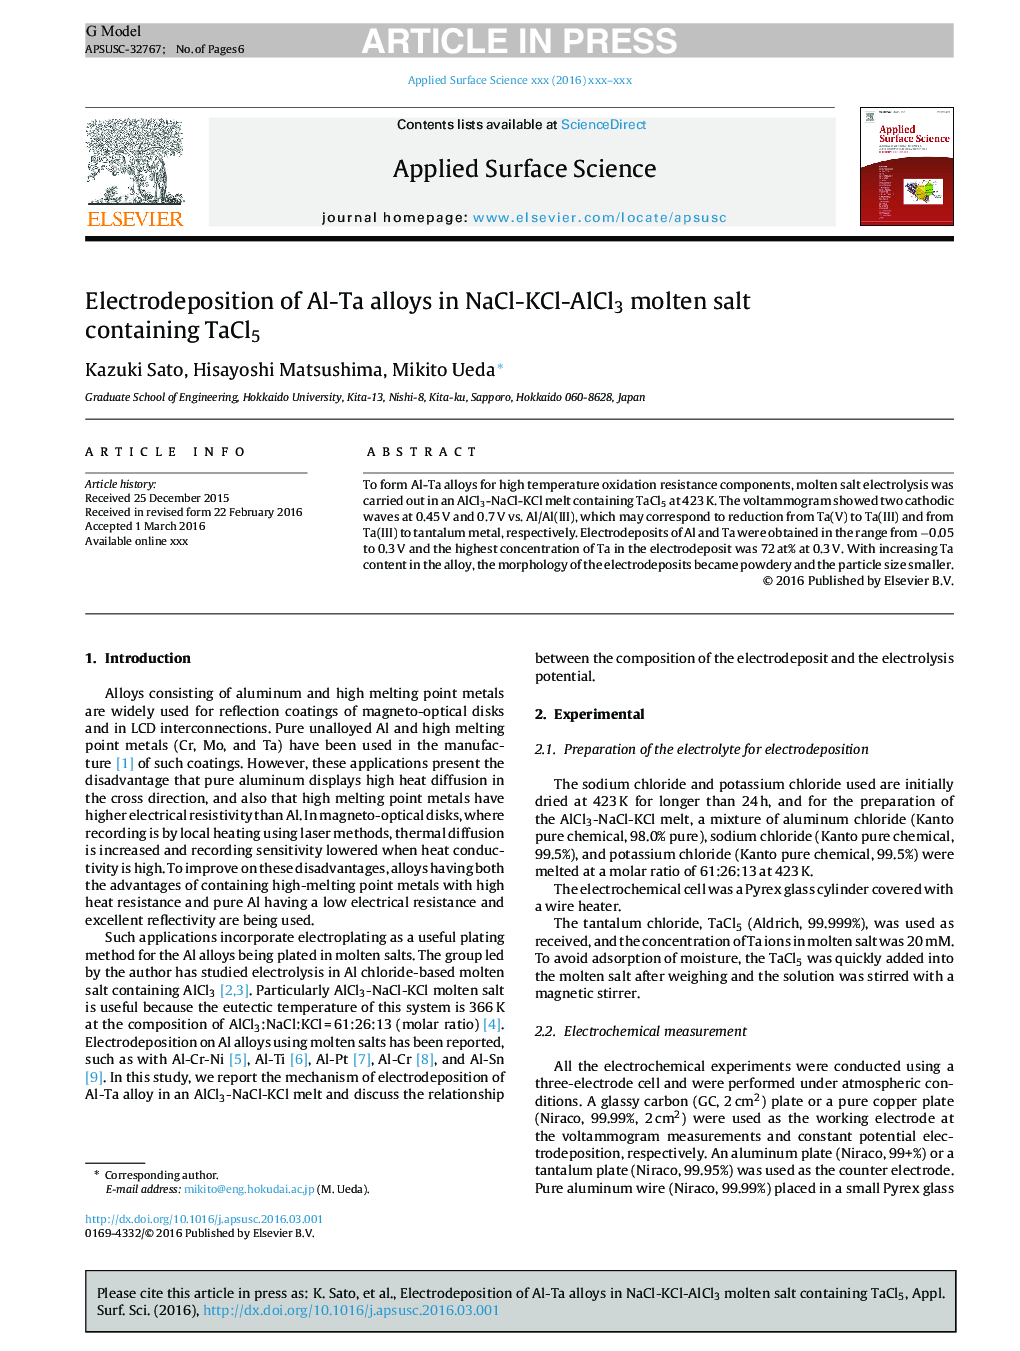 Electrodeposition of Al-Ta alloys in NaCl-KCl-AlCl3 molten salt containing TaCl5